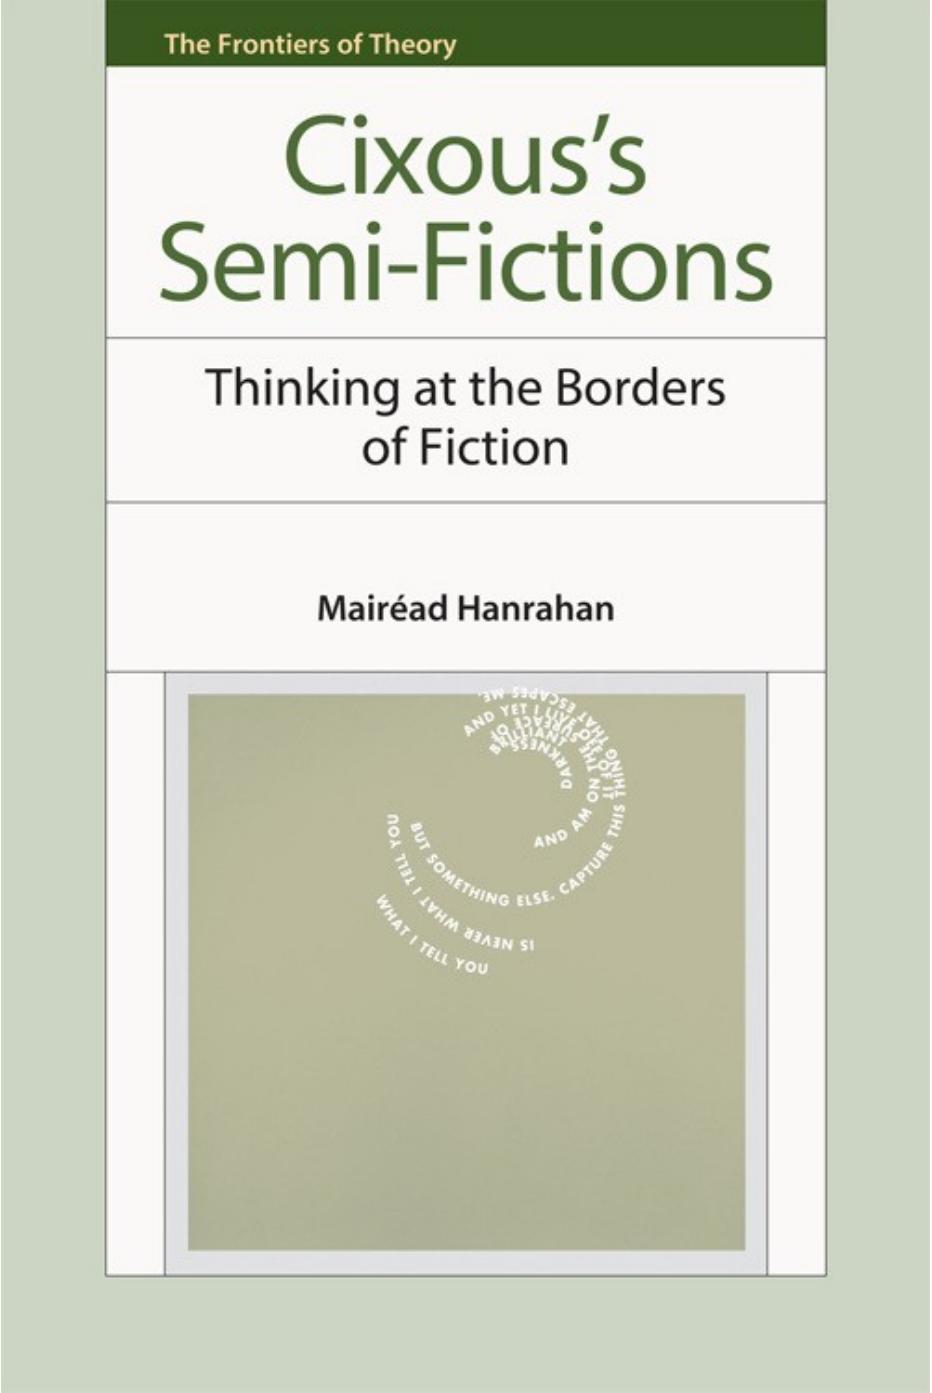 Cixous's Semi-Fictions: Thinking At the Borders of Fiction by Mairead Hanrahan